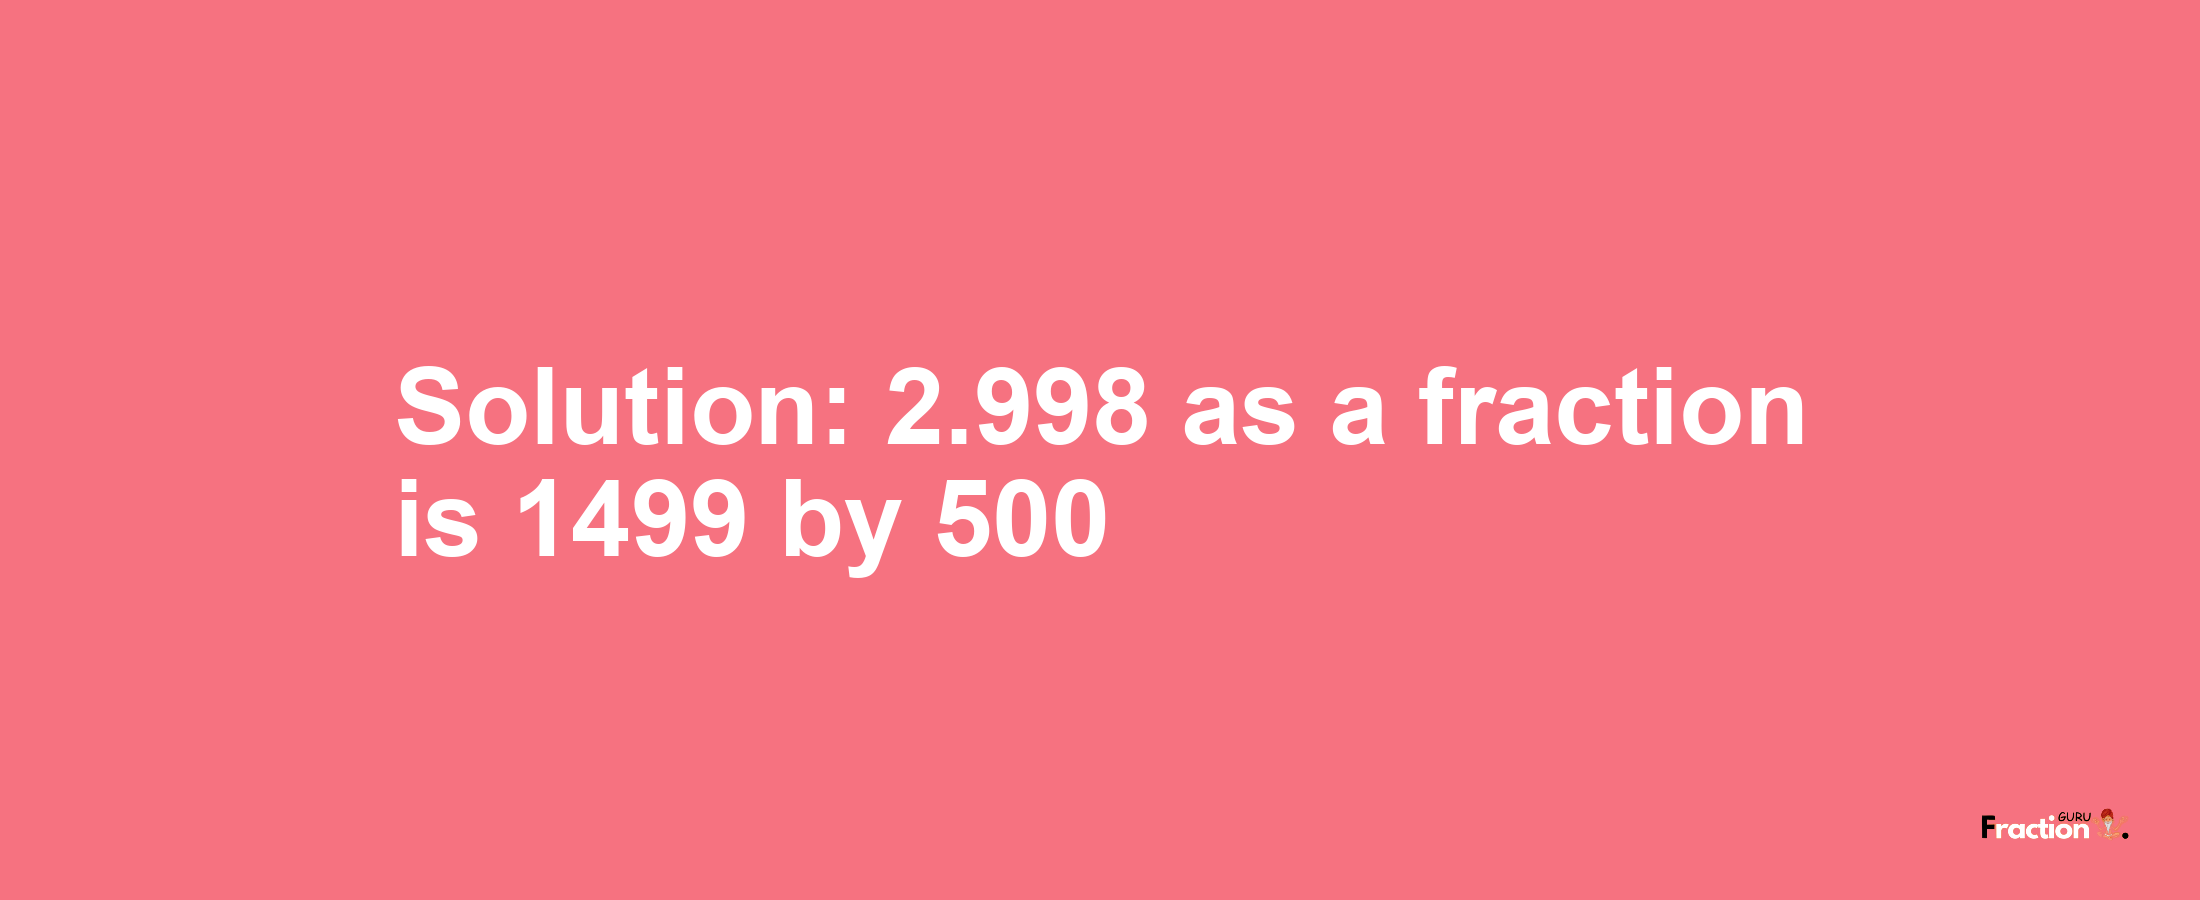 Solution:2.998 as a fraction is 1499/500